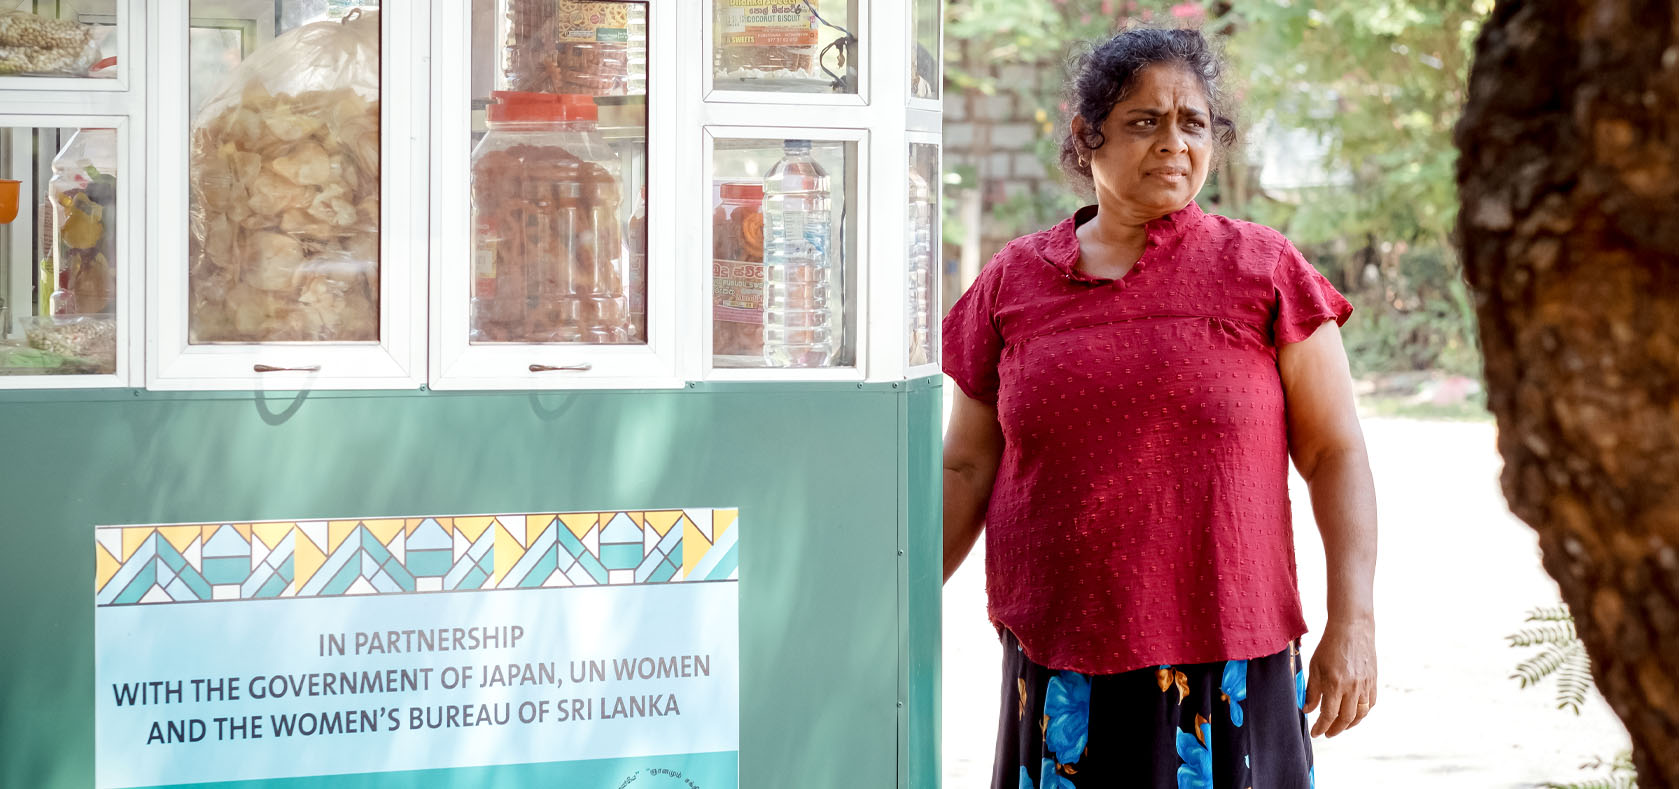 Kamalawathi stands by the side of the road to sell food items to passers-by. UN Women. Photo: UN Women Sri Lanka/Ruvin De Silva